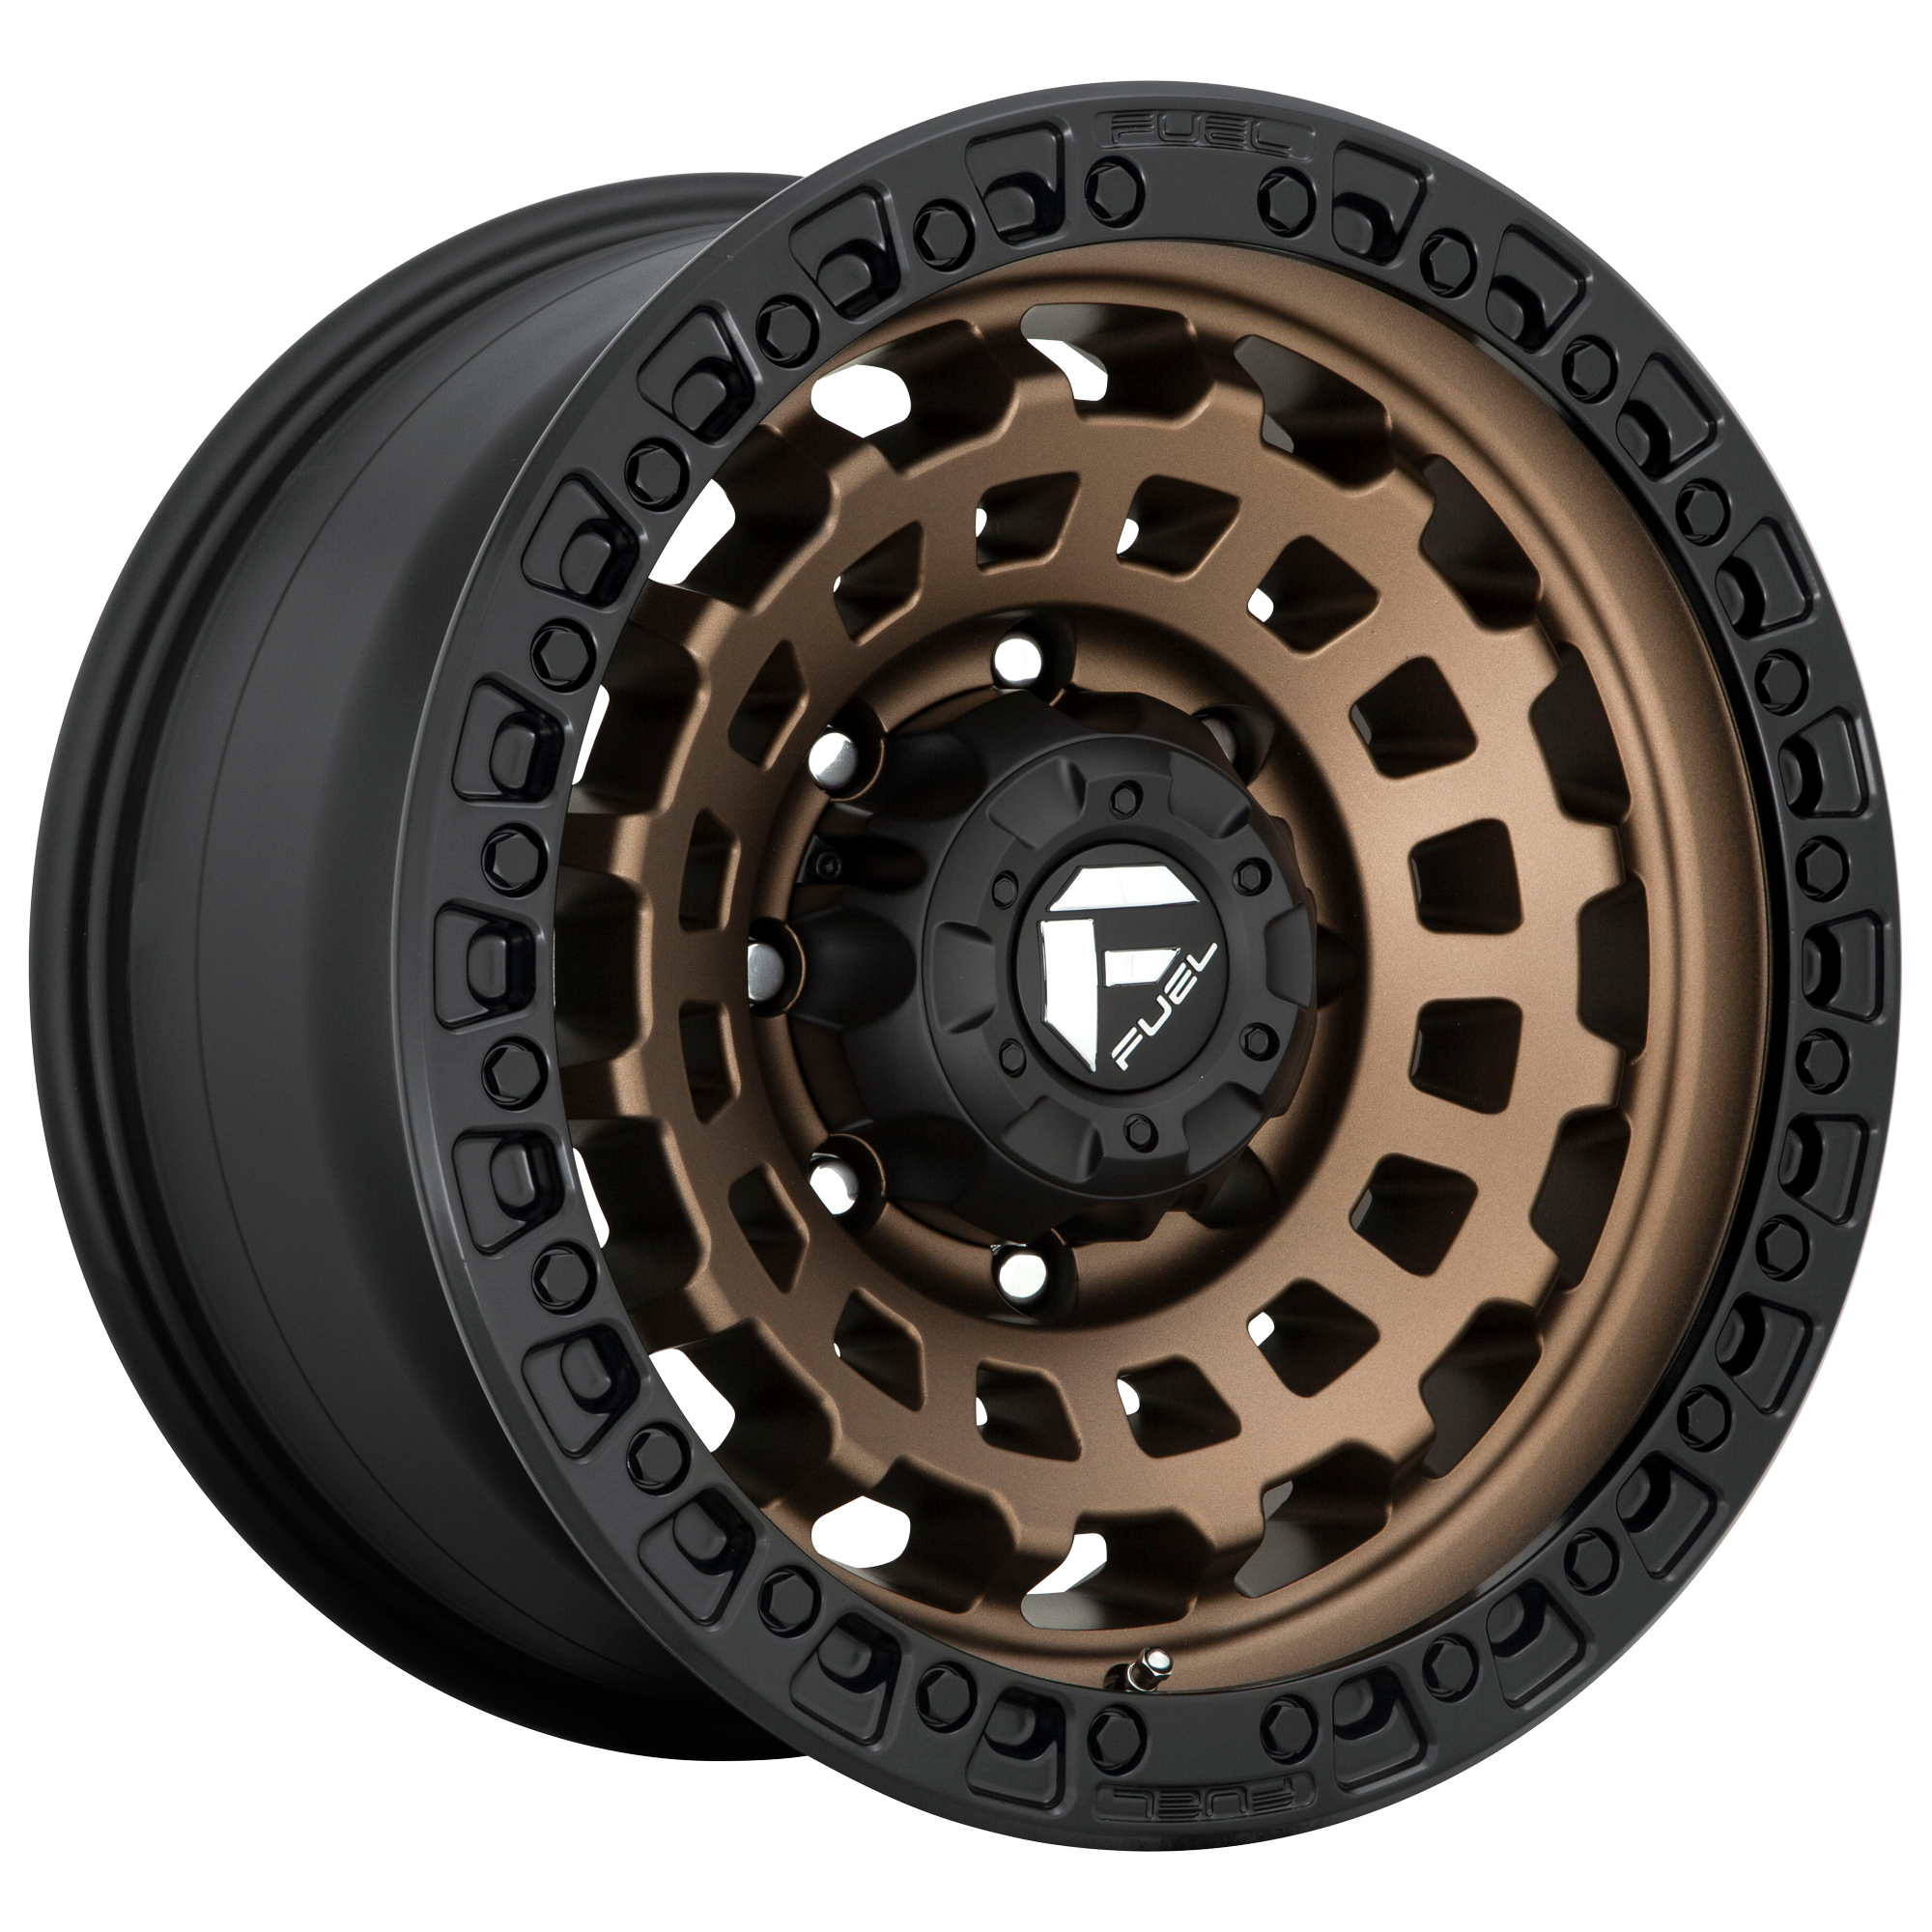 ZEPHYR 18x9 6x139.70 MATTE BRONZE BLACK BEAD RING (-12 mm) - Tires and Engine Performance